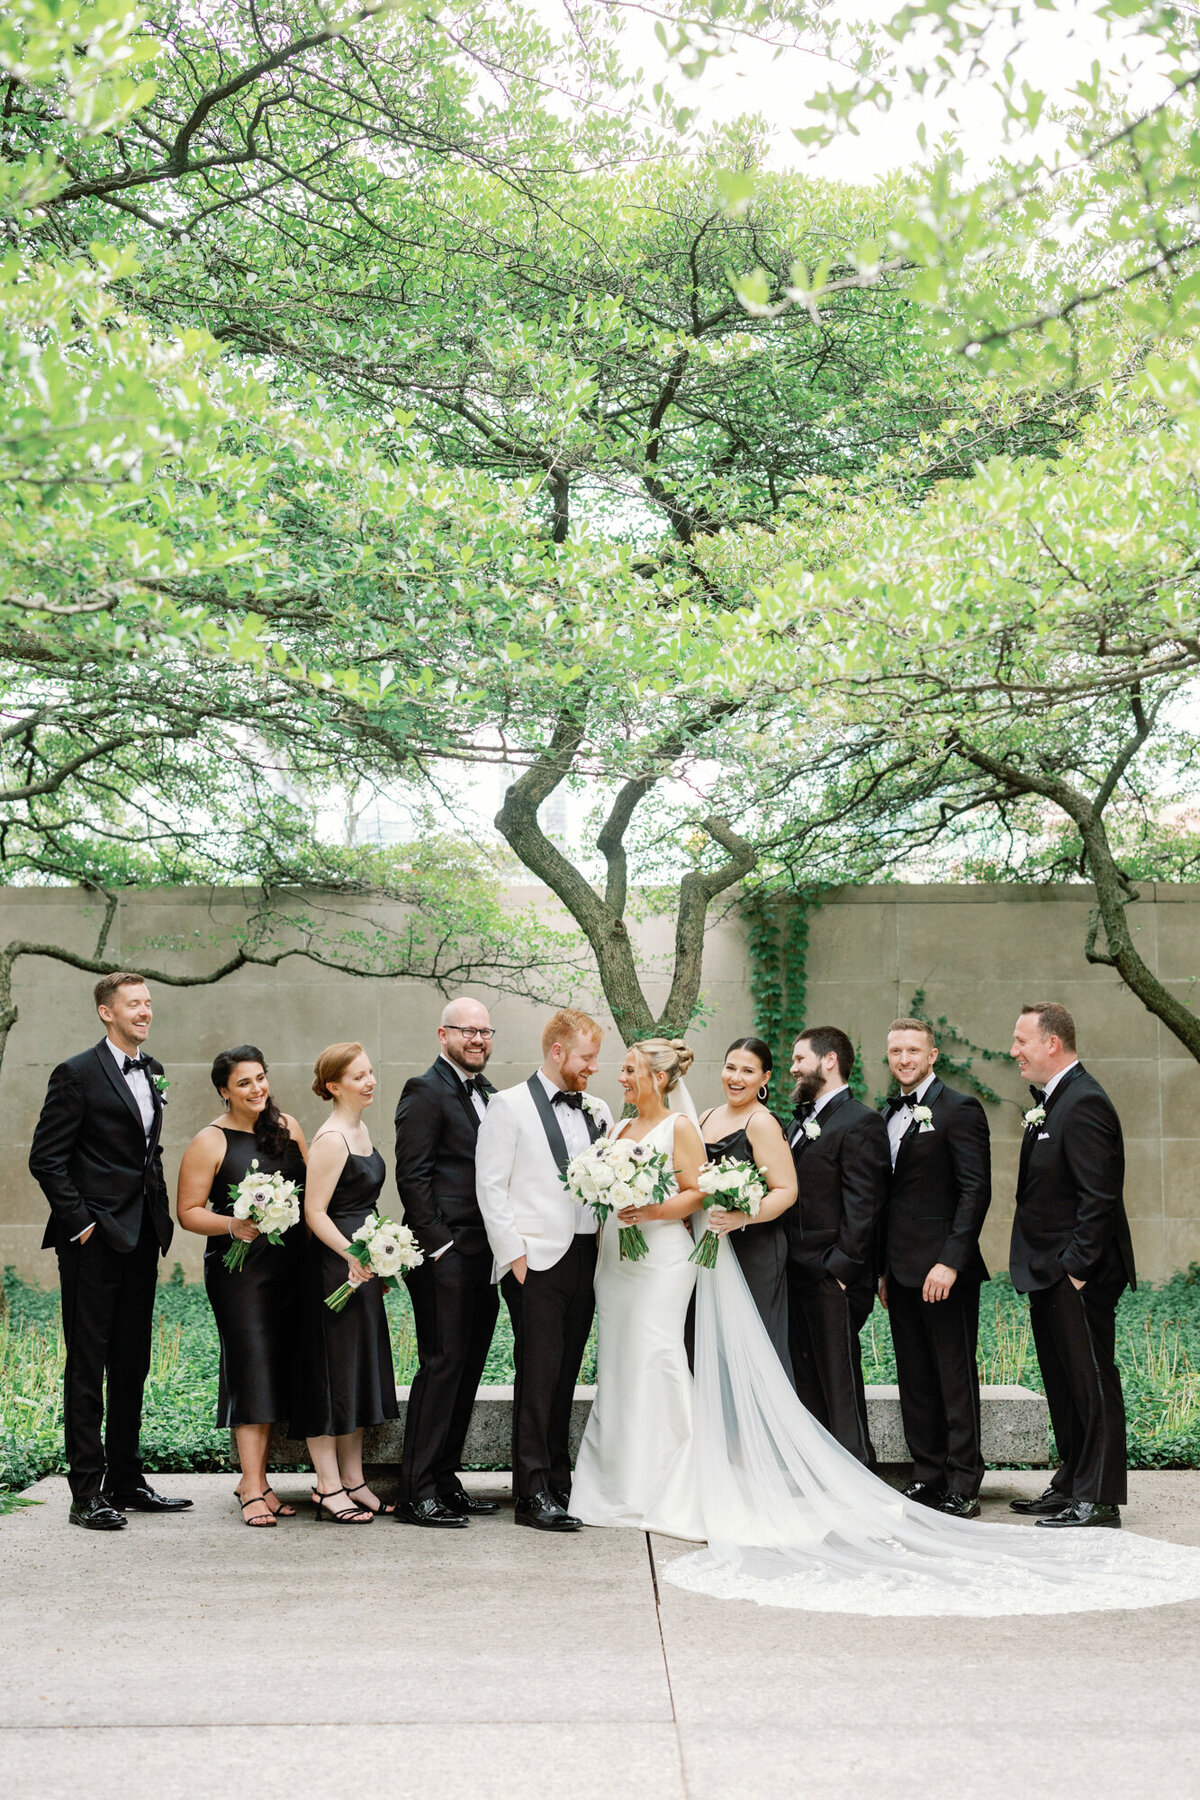 A wedding party poses for a photo in the South Garden at the Art Institute of Chicago